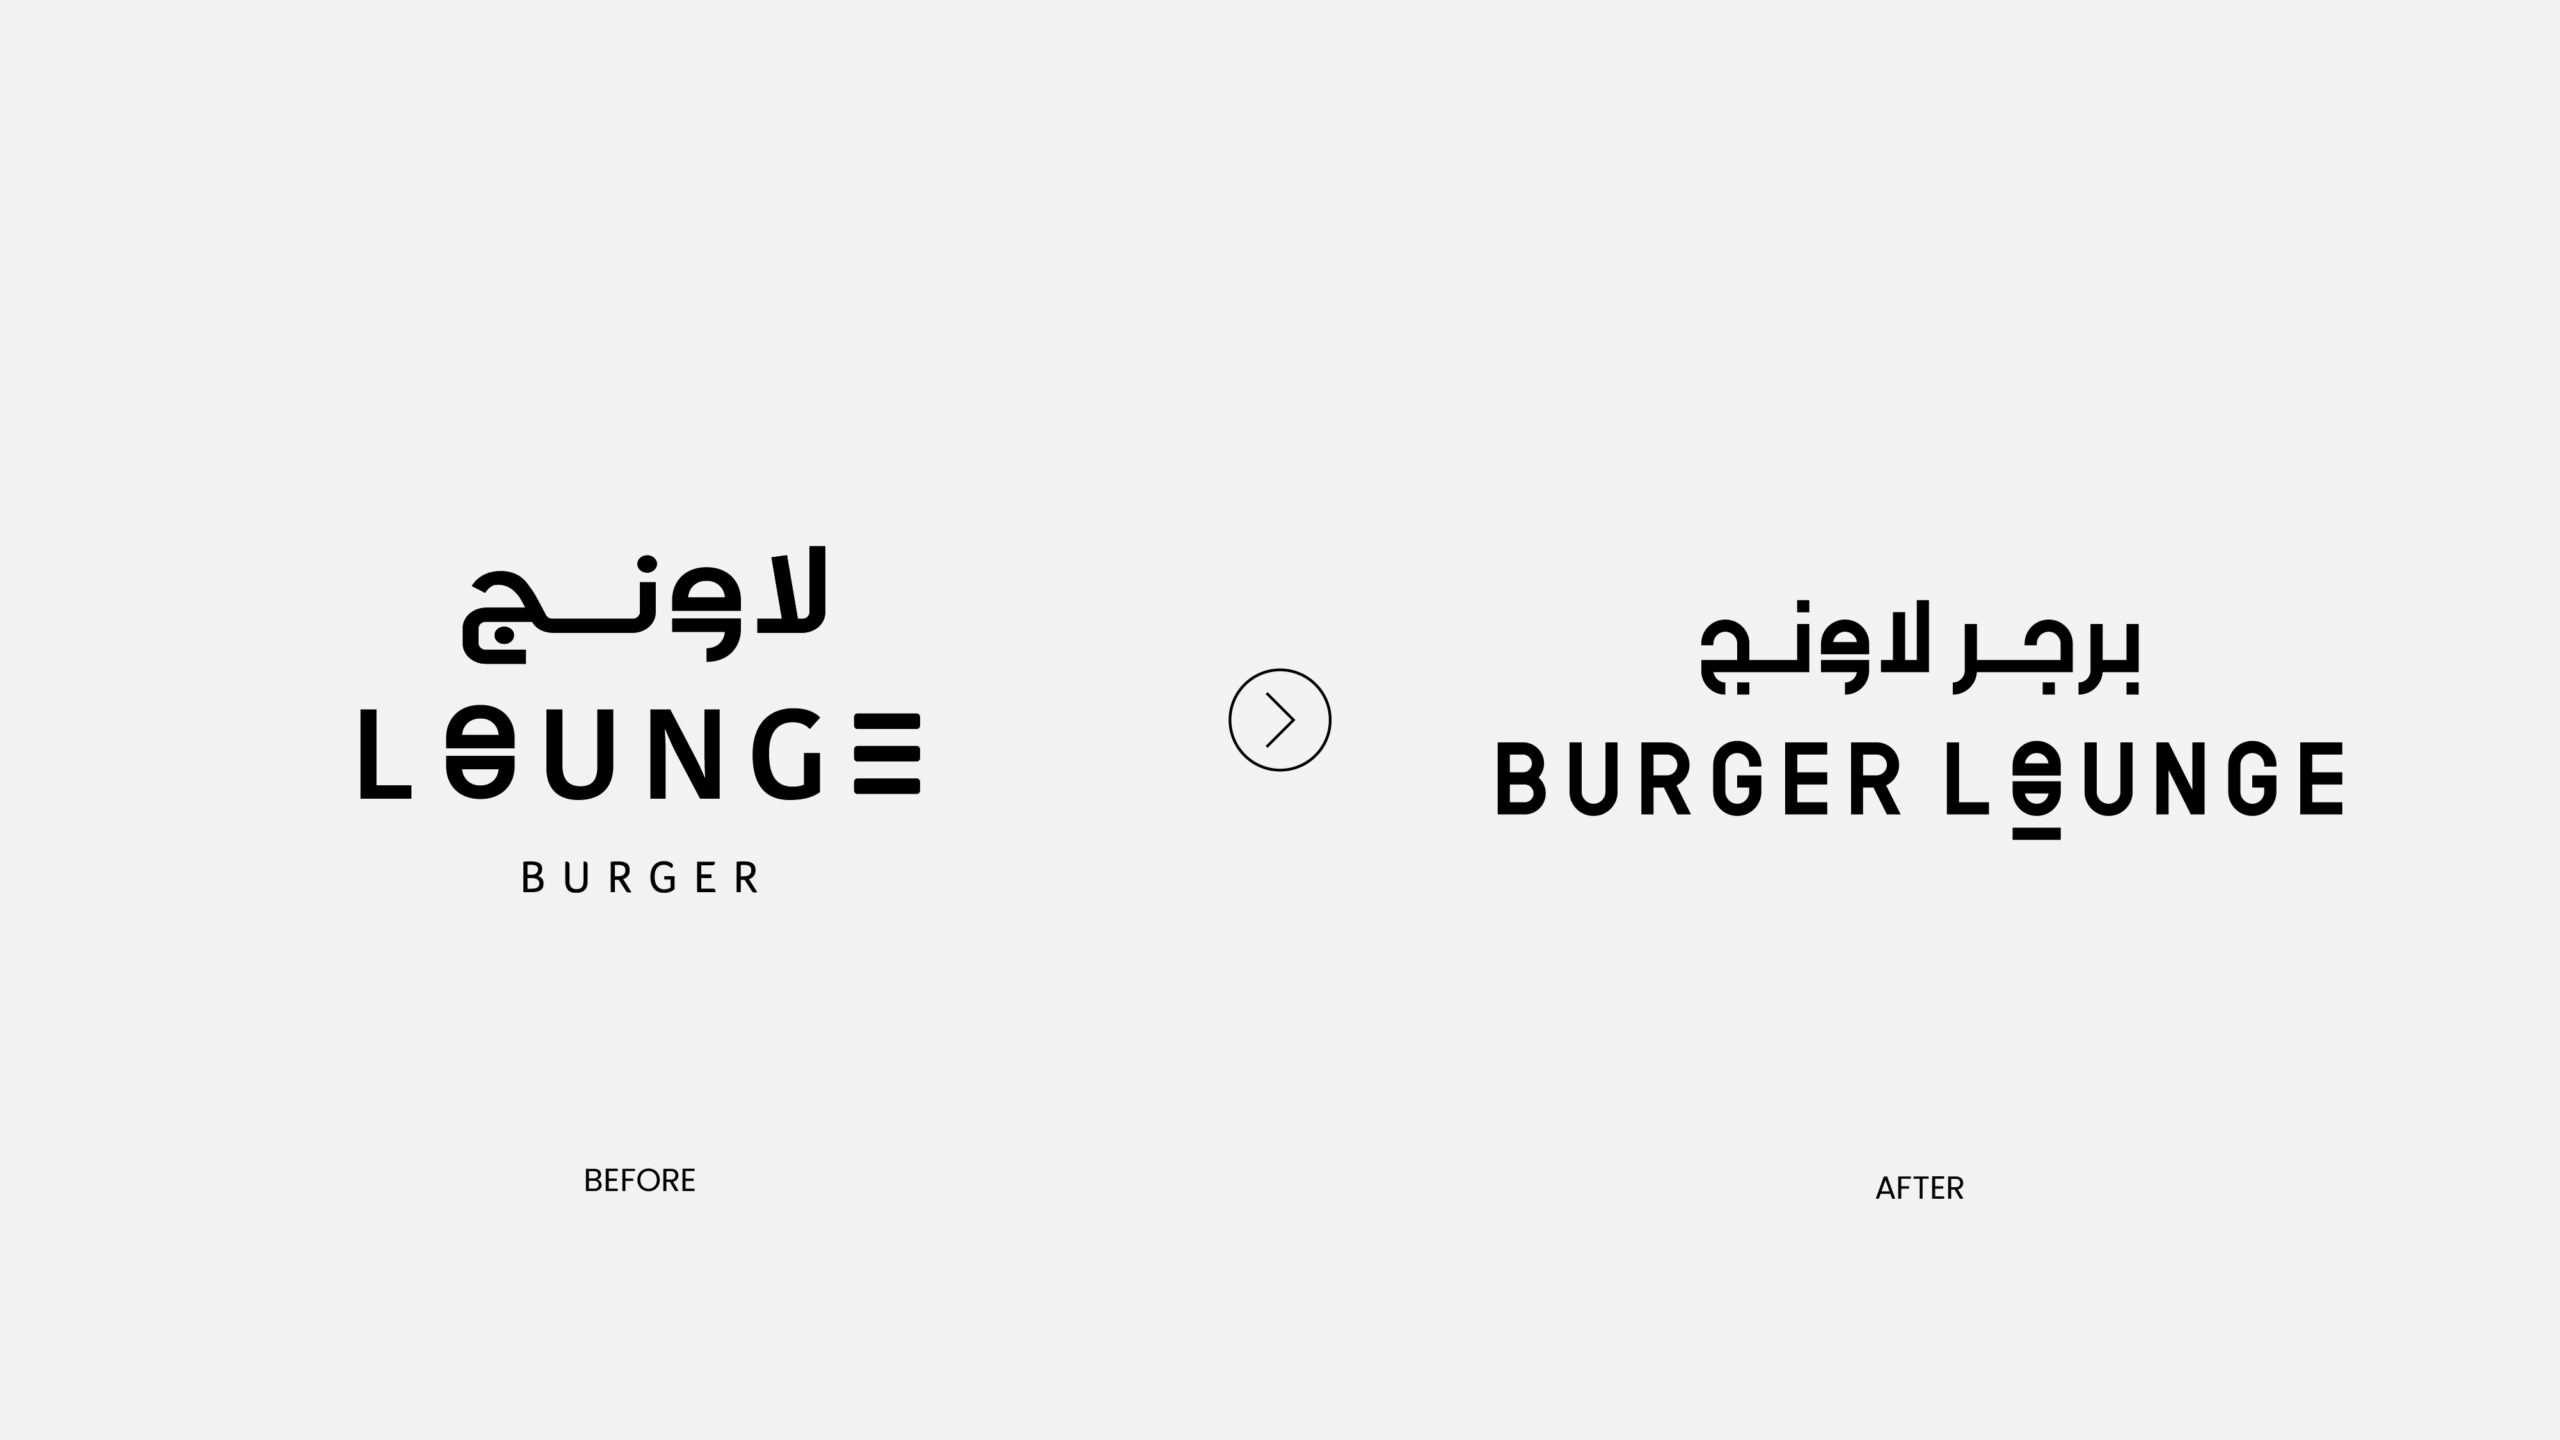 Burger-Lounge-Brand-Facelift-By-Millimeter-Creative-Agency-D01